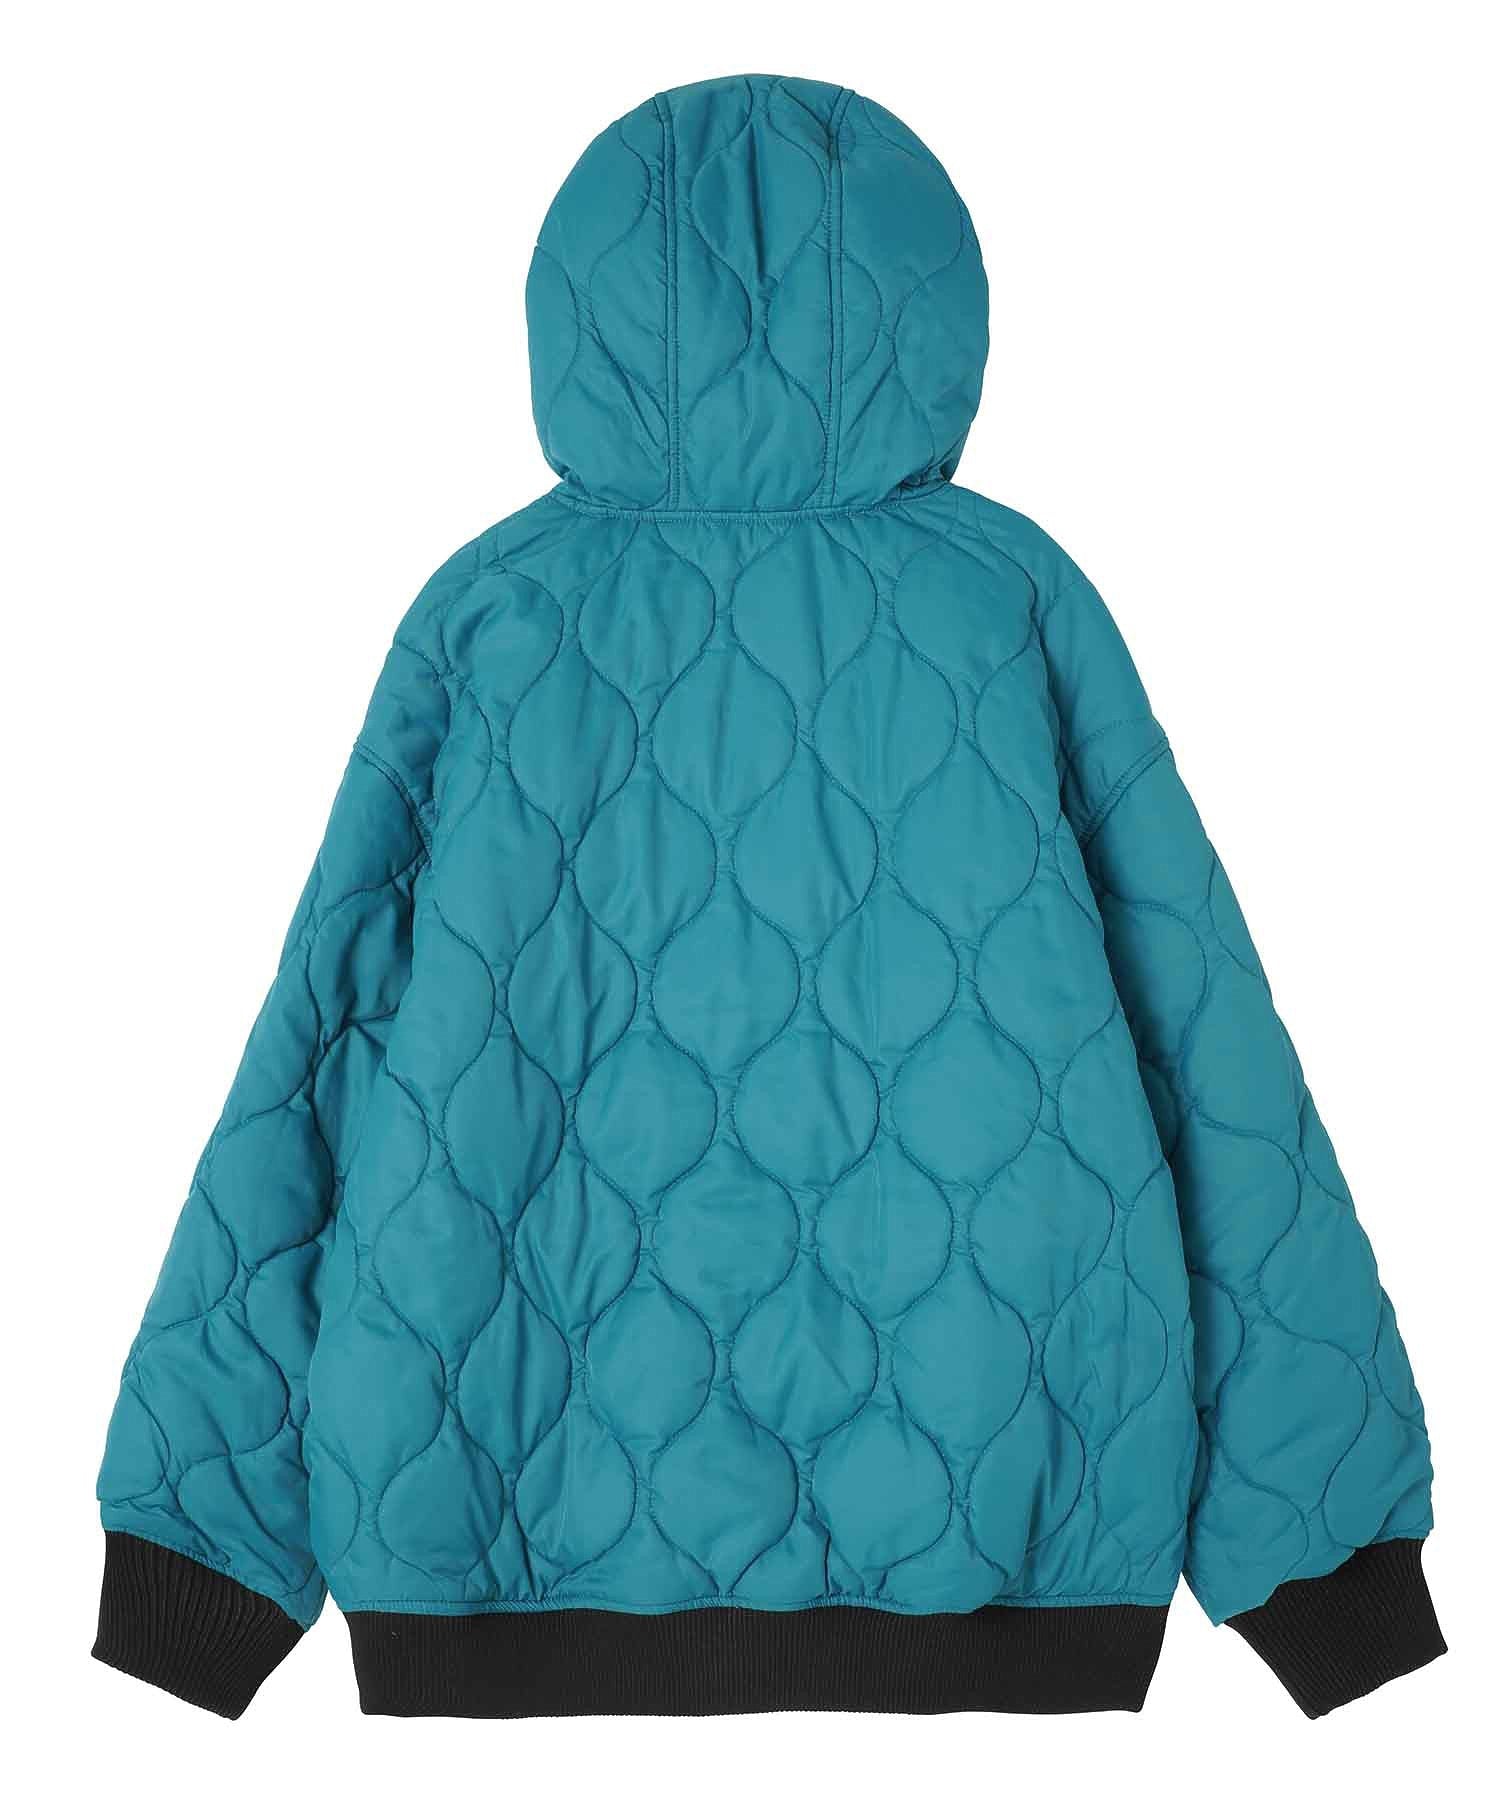 REVERSIBLE QUILTED JACKET X-girl – calif